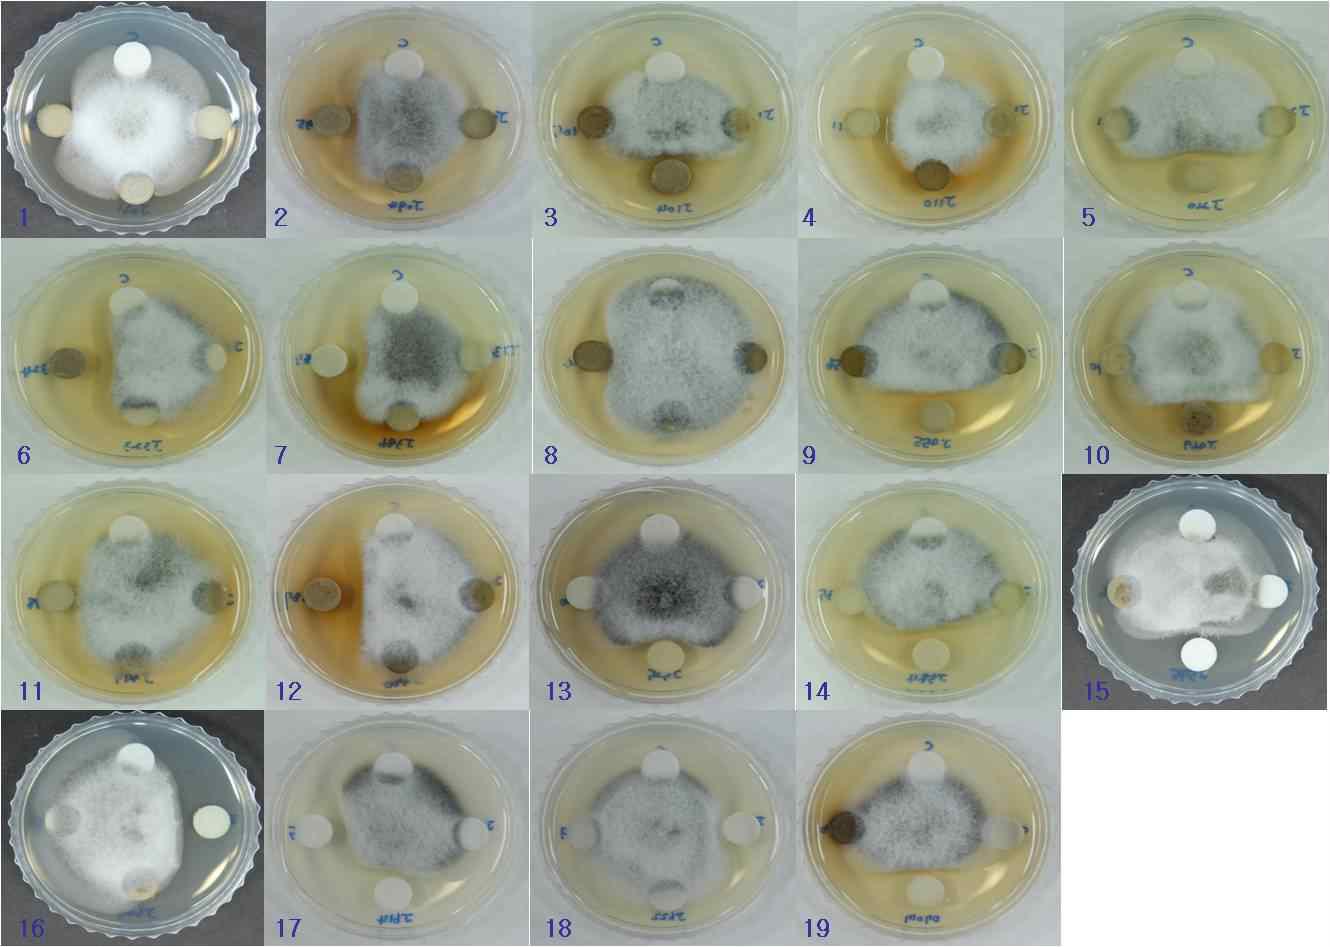 in vitro antifungal effects of crude extracts from Jeju native resources against Magnaporthe grisea. 1, JBR55; 2, JBR98; 3, JBR107; 4, JBR114; 5, JBR213; 6, JBR325; 7, JBR379; 8, JBR406; 9, JBR444; 10, JBR458; 11, JBR467; 12, JBR476; 13, JBR510; 14, JBR563; 15, JBR573; 16, JBR580; 17, JBR587/JBR588; 18, JBR590; 19, JBR612.